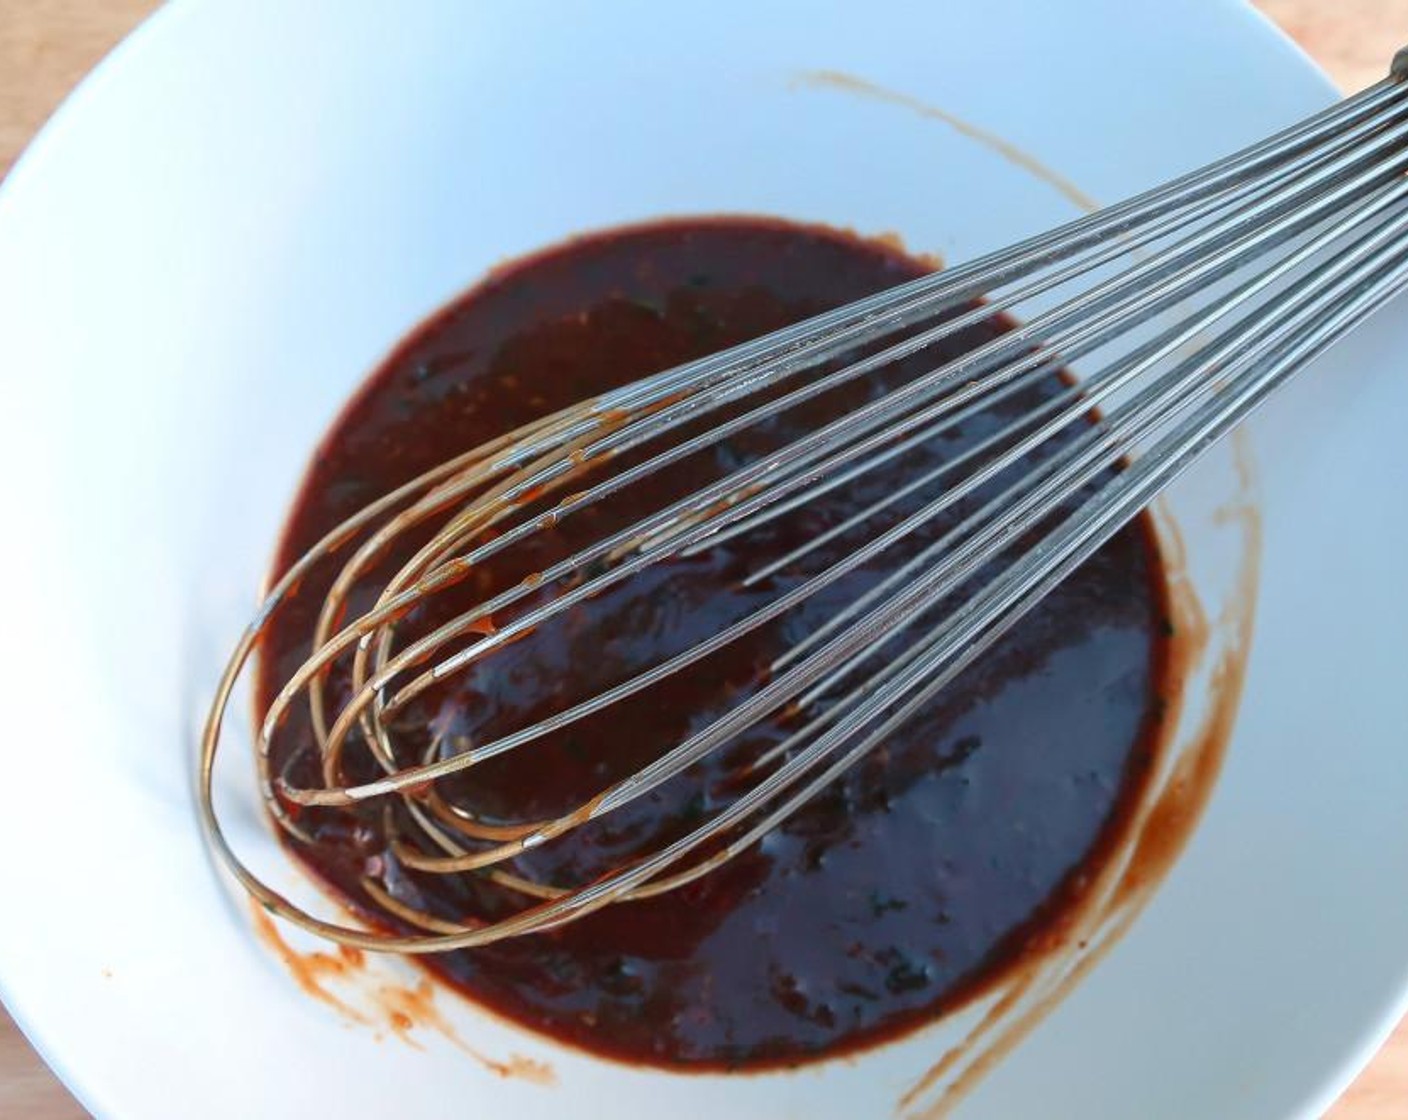 step 6 For the BBQ-hoisin sauce, mix Hoisin Sauce (1/3 cup), Light Soy Sauce (1/3 cup), Ketchup (1/3 cup), Chili Sauce (1 Tbsp), Honey (1 Tbsp), Chinese Five Spice Powder (1 tsp), Dry Mustard (1 tsp), Garlic Paste (1 tsp), Fresh Ginger (1/2 tsp) and Toasted Sesame Oil (1/2 tsp).